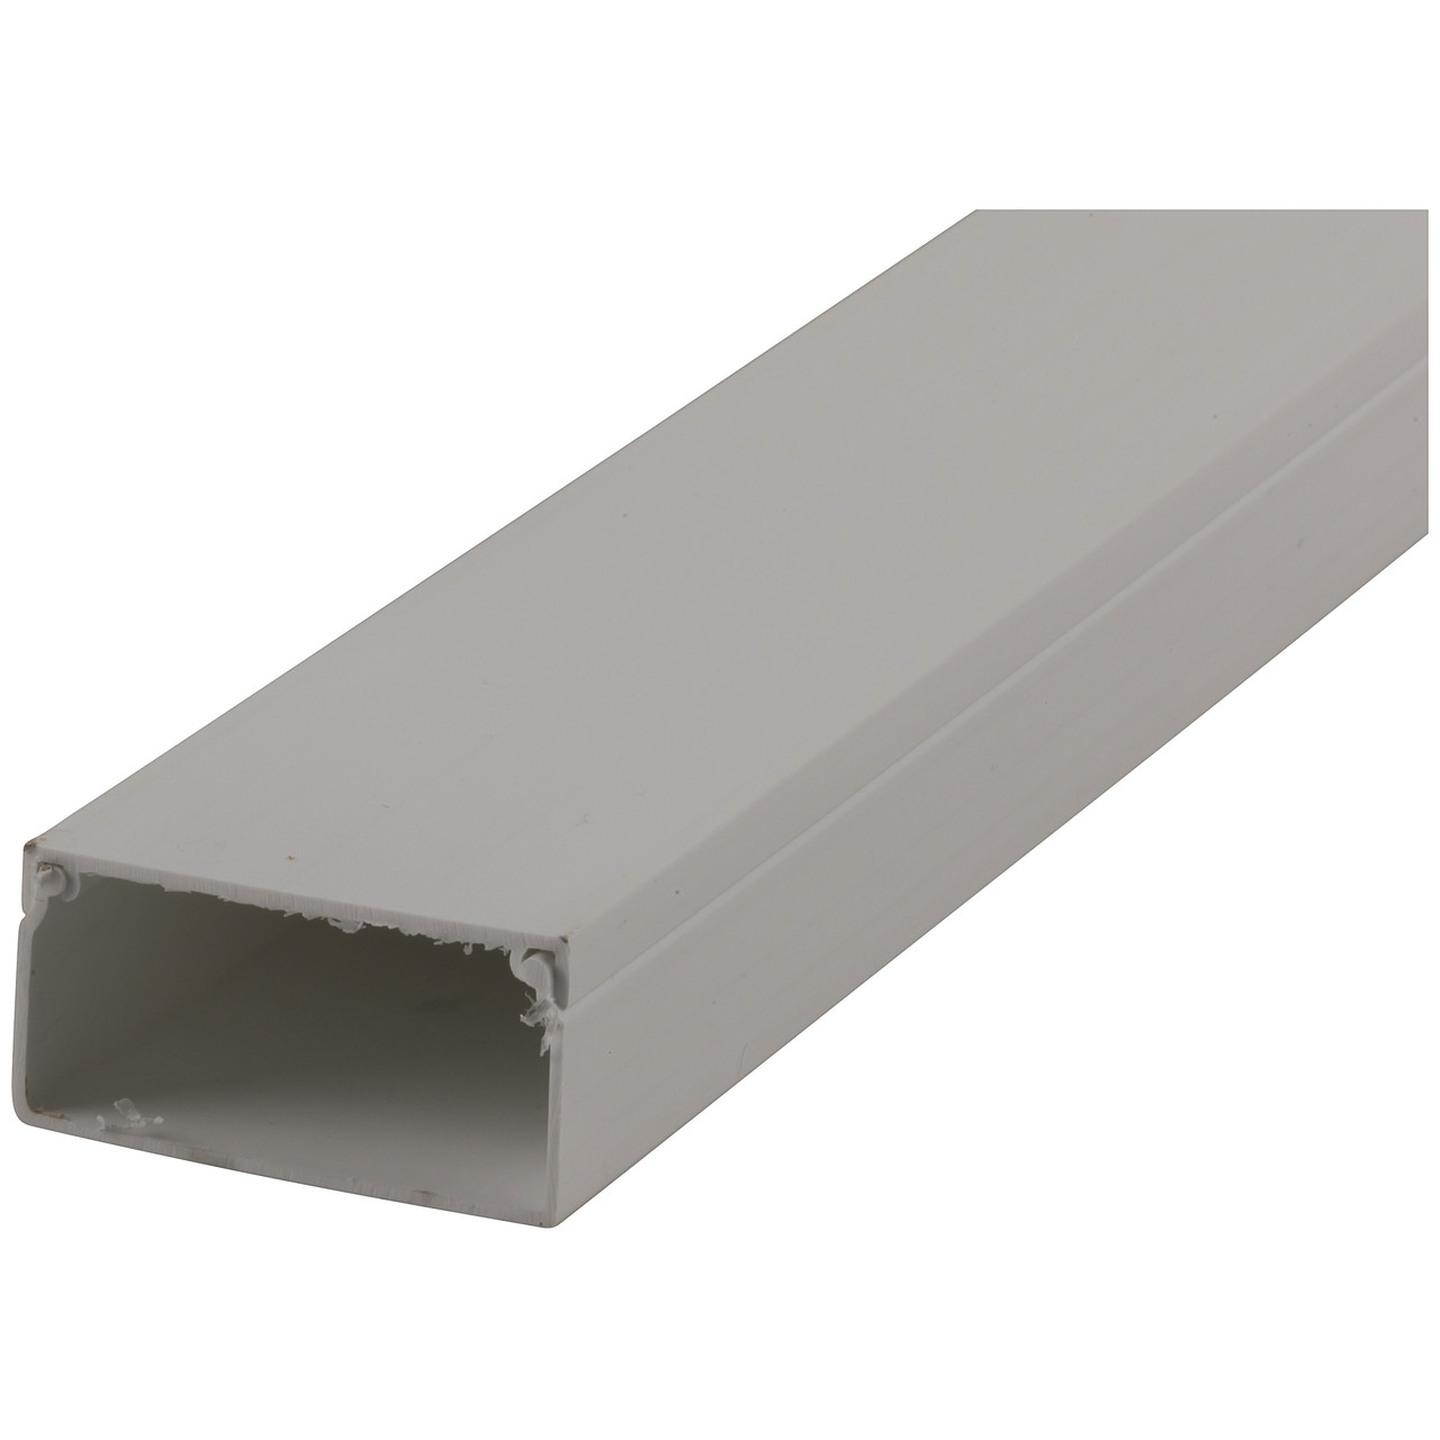 Rectangular Cable Duct 50 x 25mm - 1m